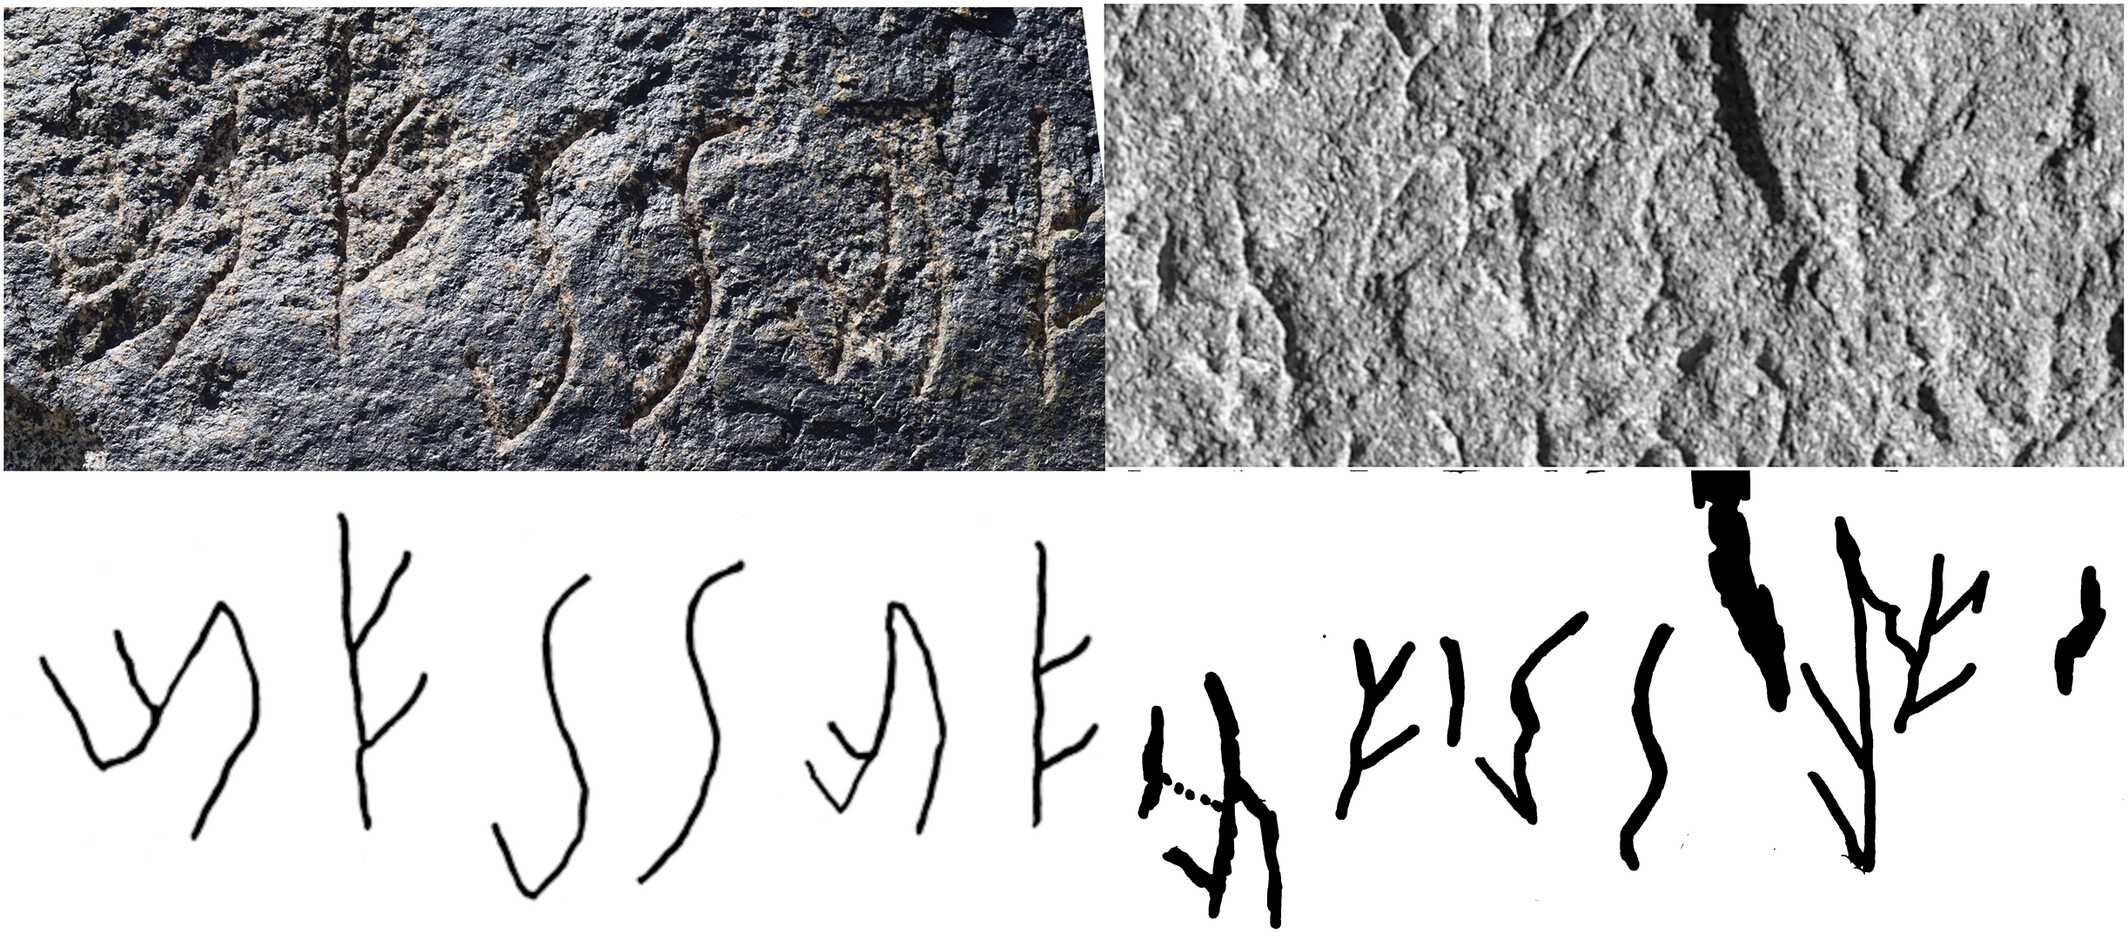 Ancient 'unknown Kushan script' finally deciphered 5